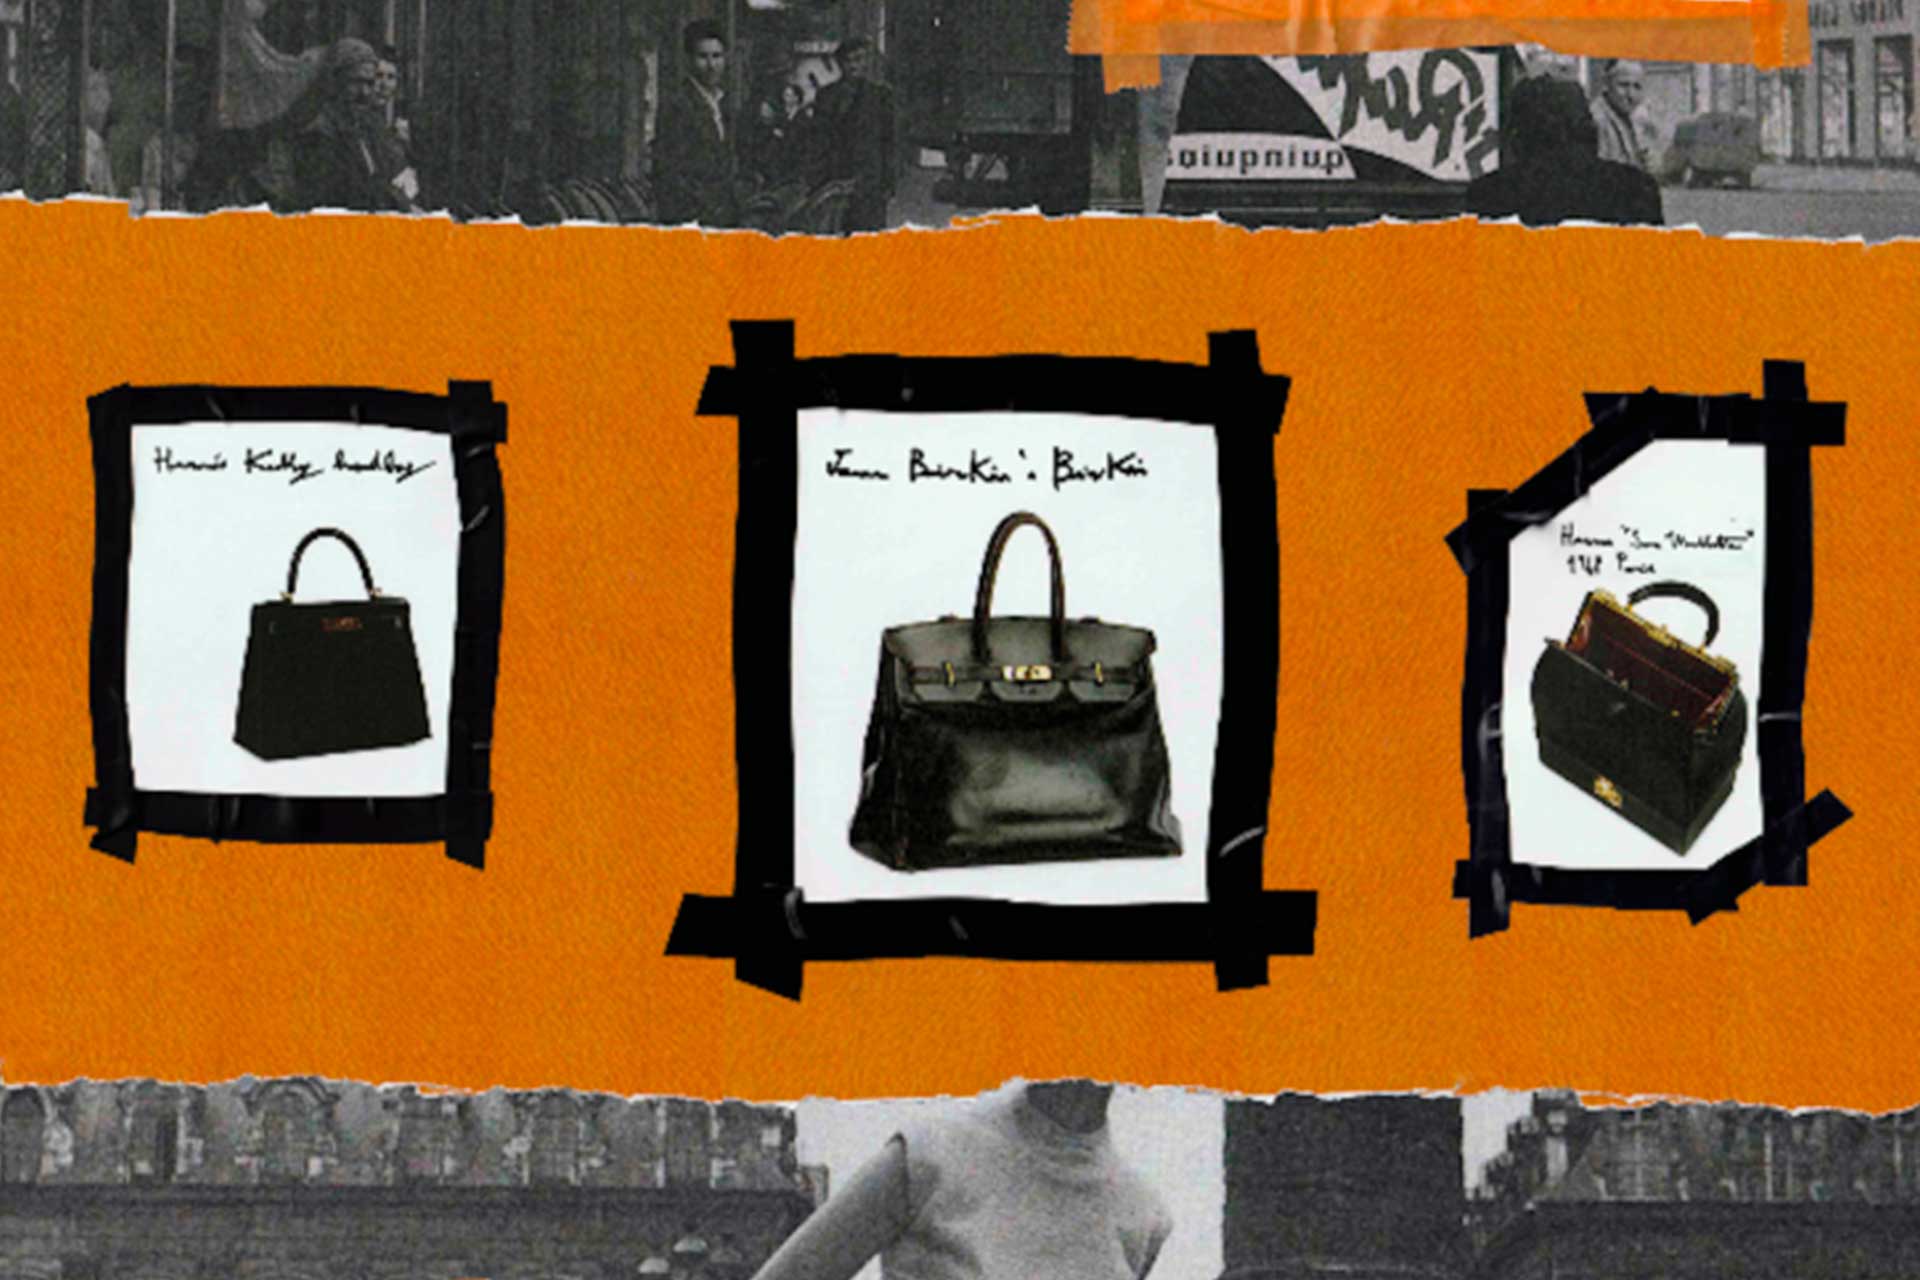 The History and Evolution of the Birkin Bag - Invaluable